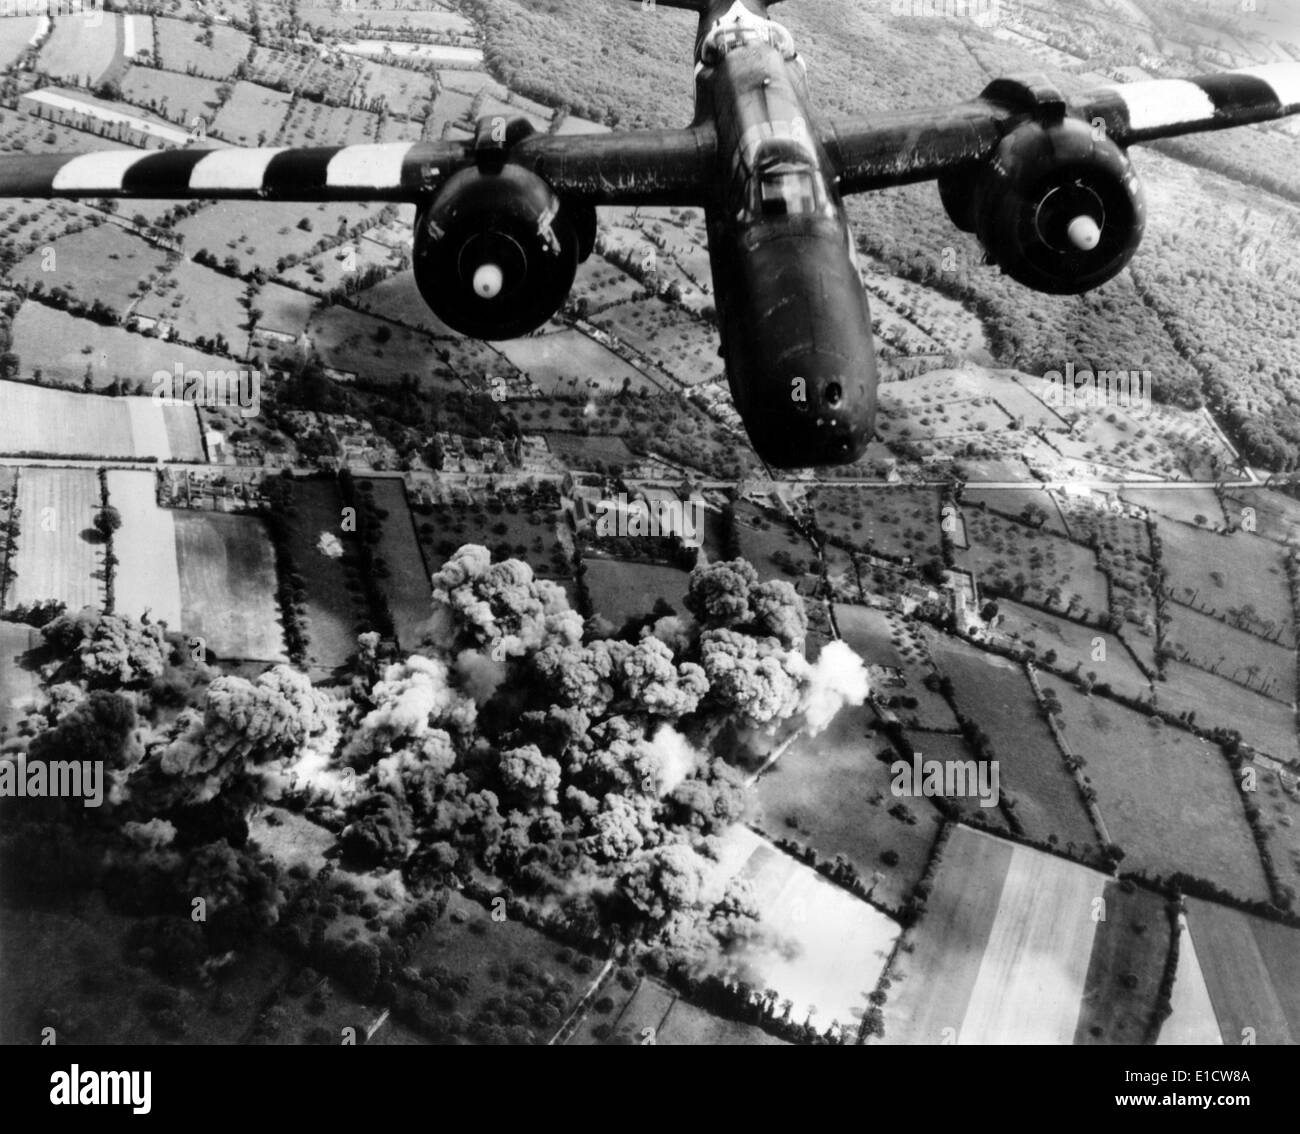 Aerial view of a A-20 G Havoc light bomber with D-Day 'invasion stripes' painted on its wings. Plumes of smoke rise from the Stock Photo